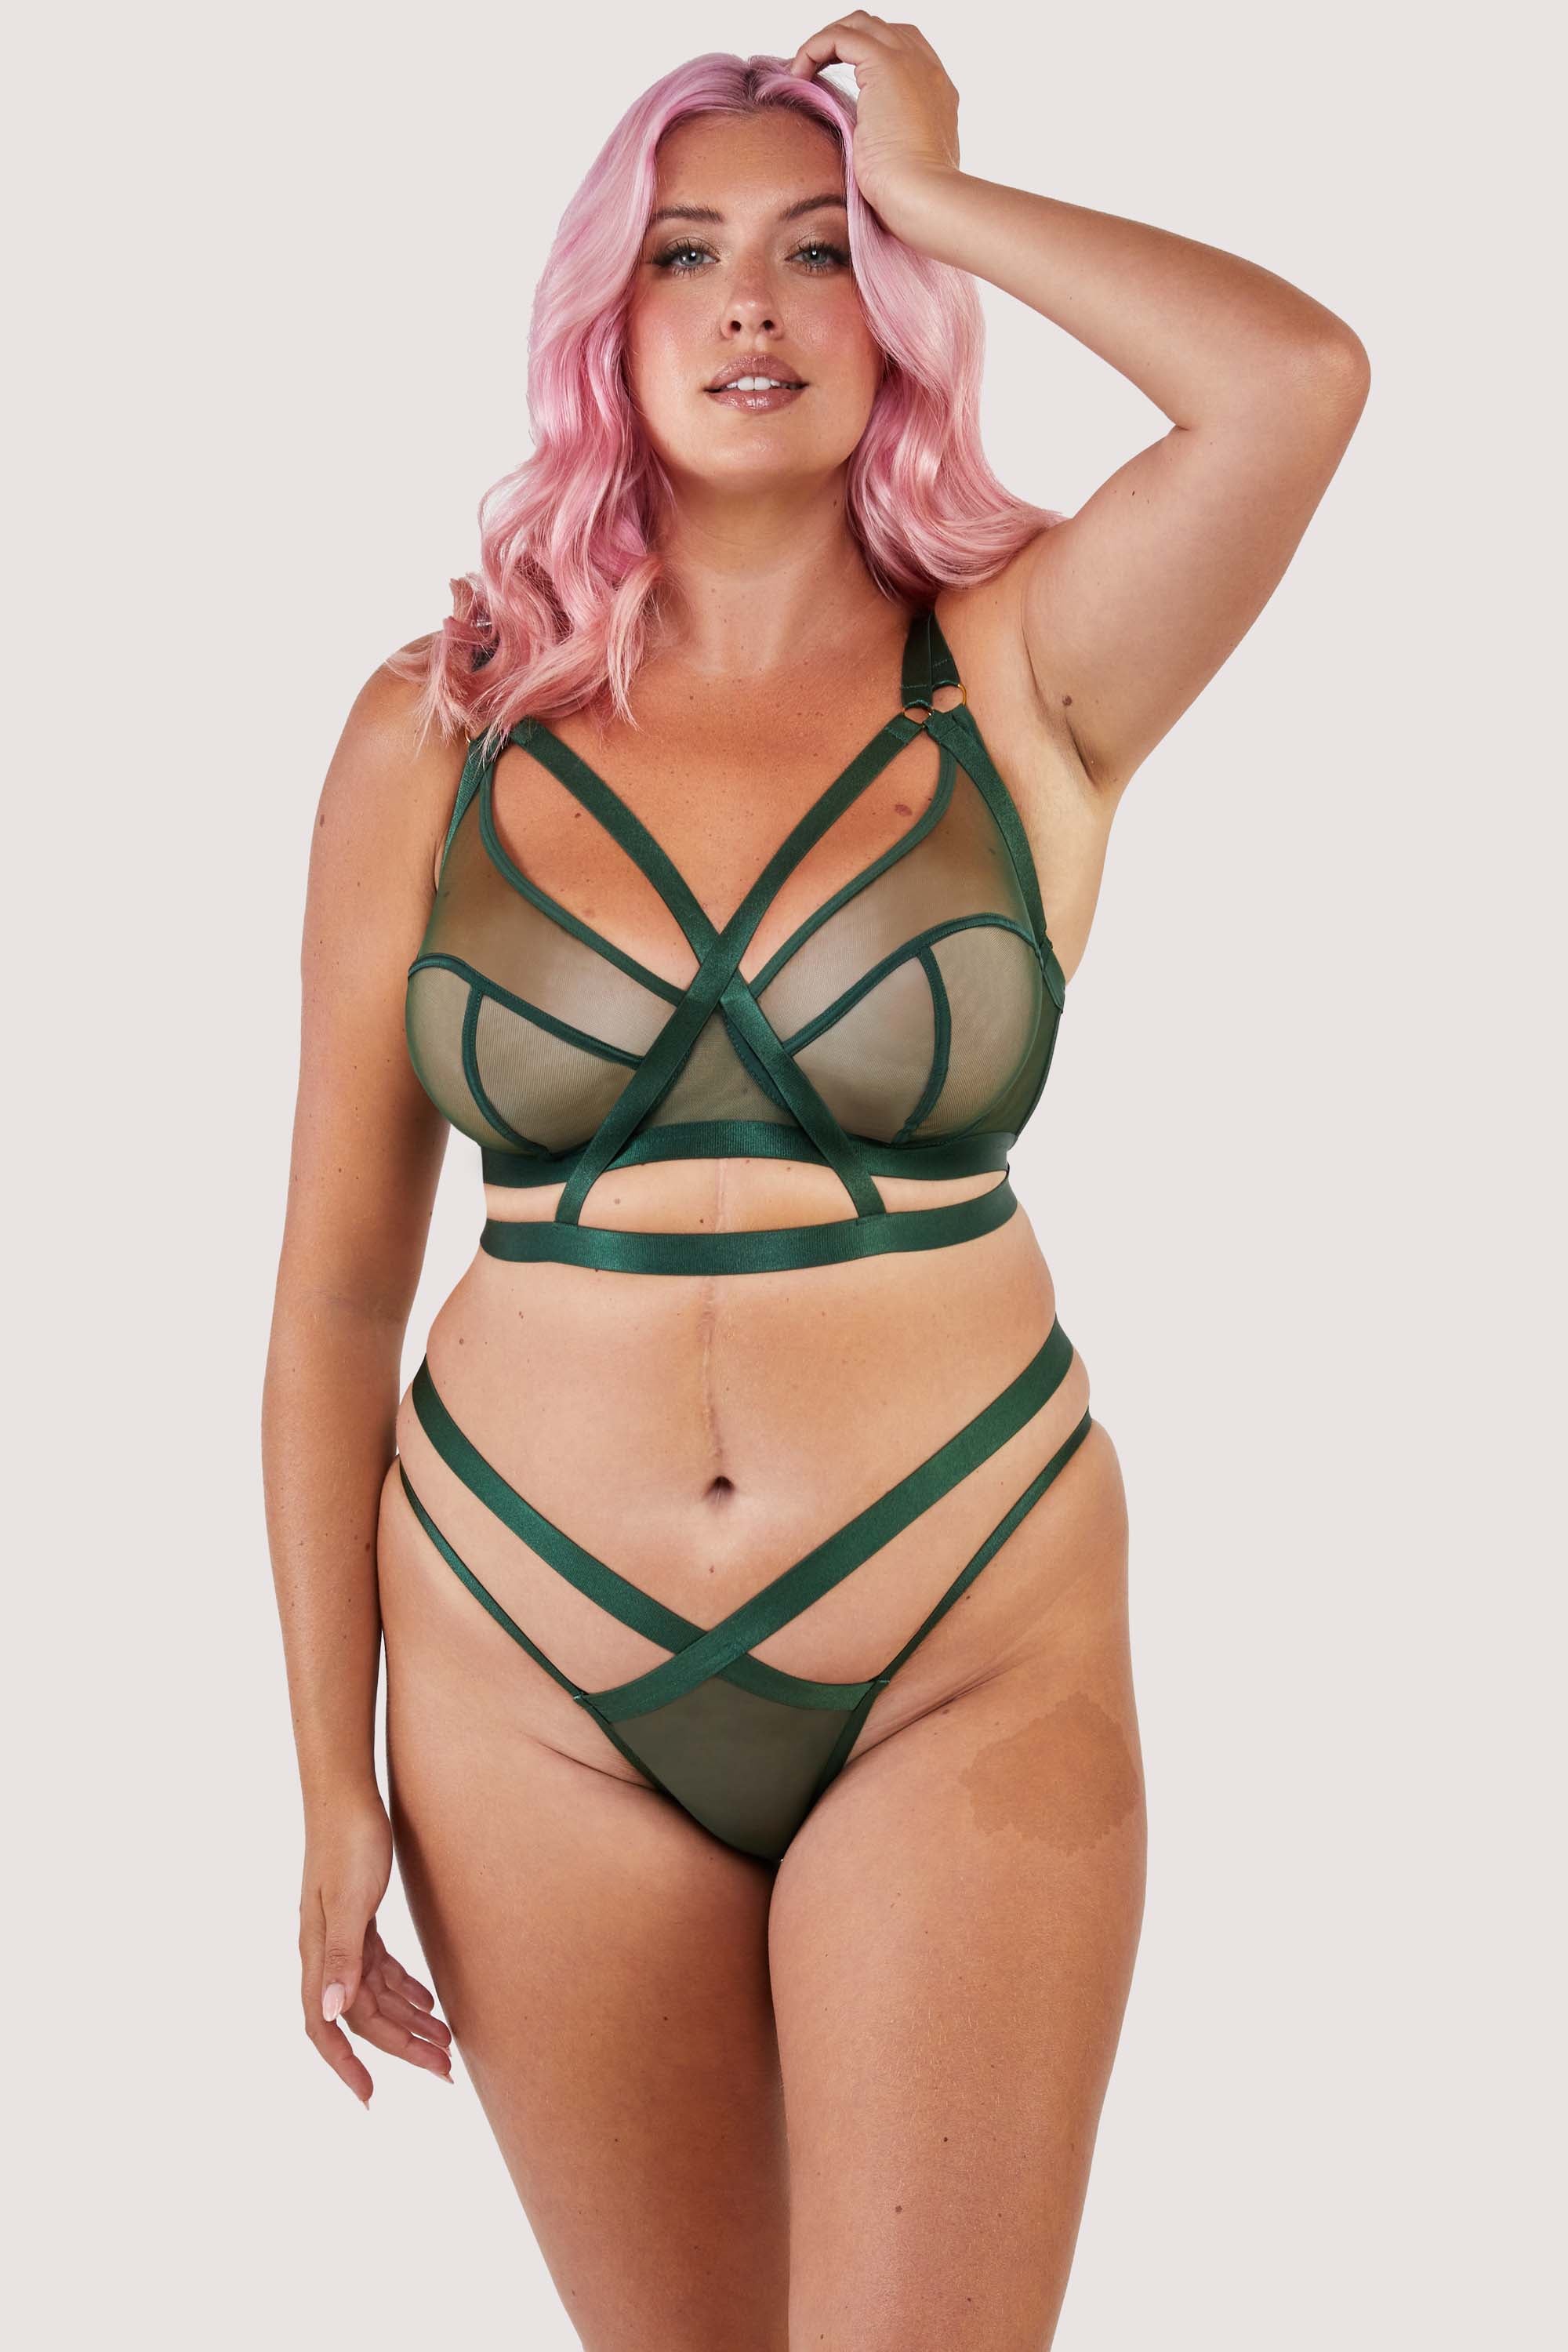 Green satin harness style bra seen with matching brief and suspender.